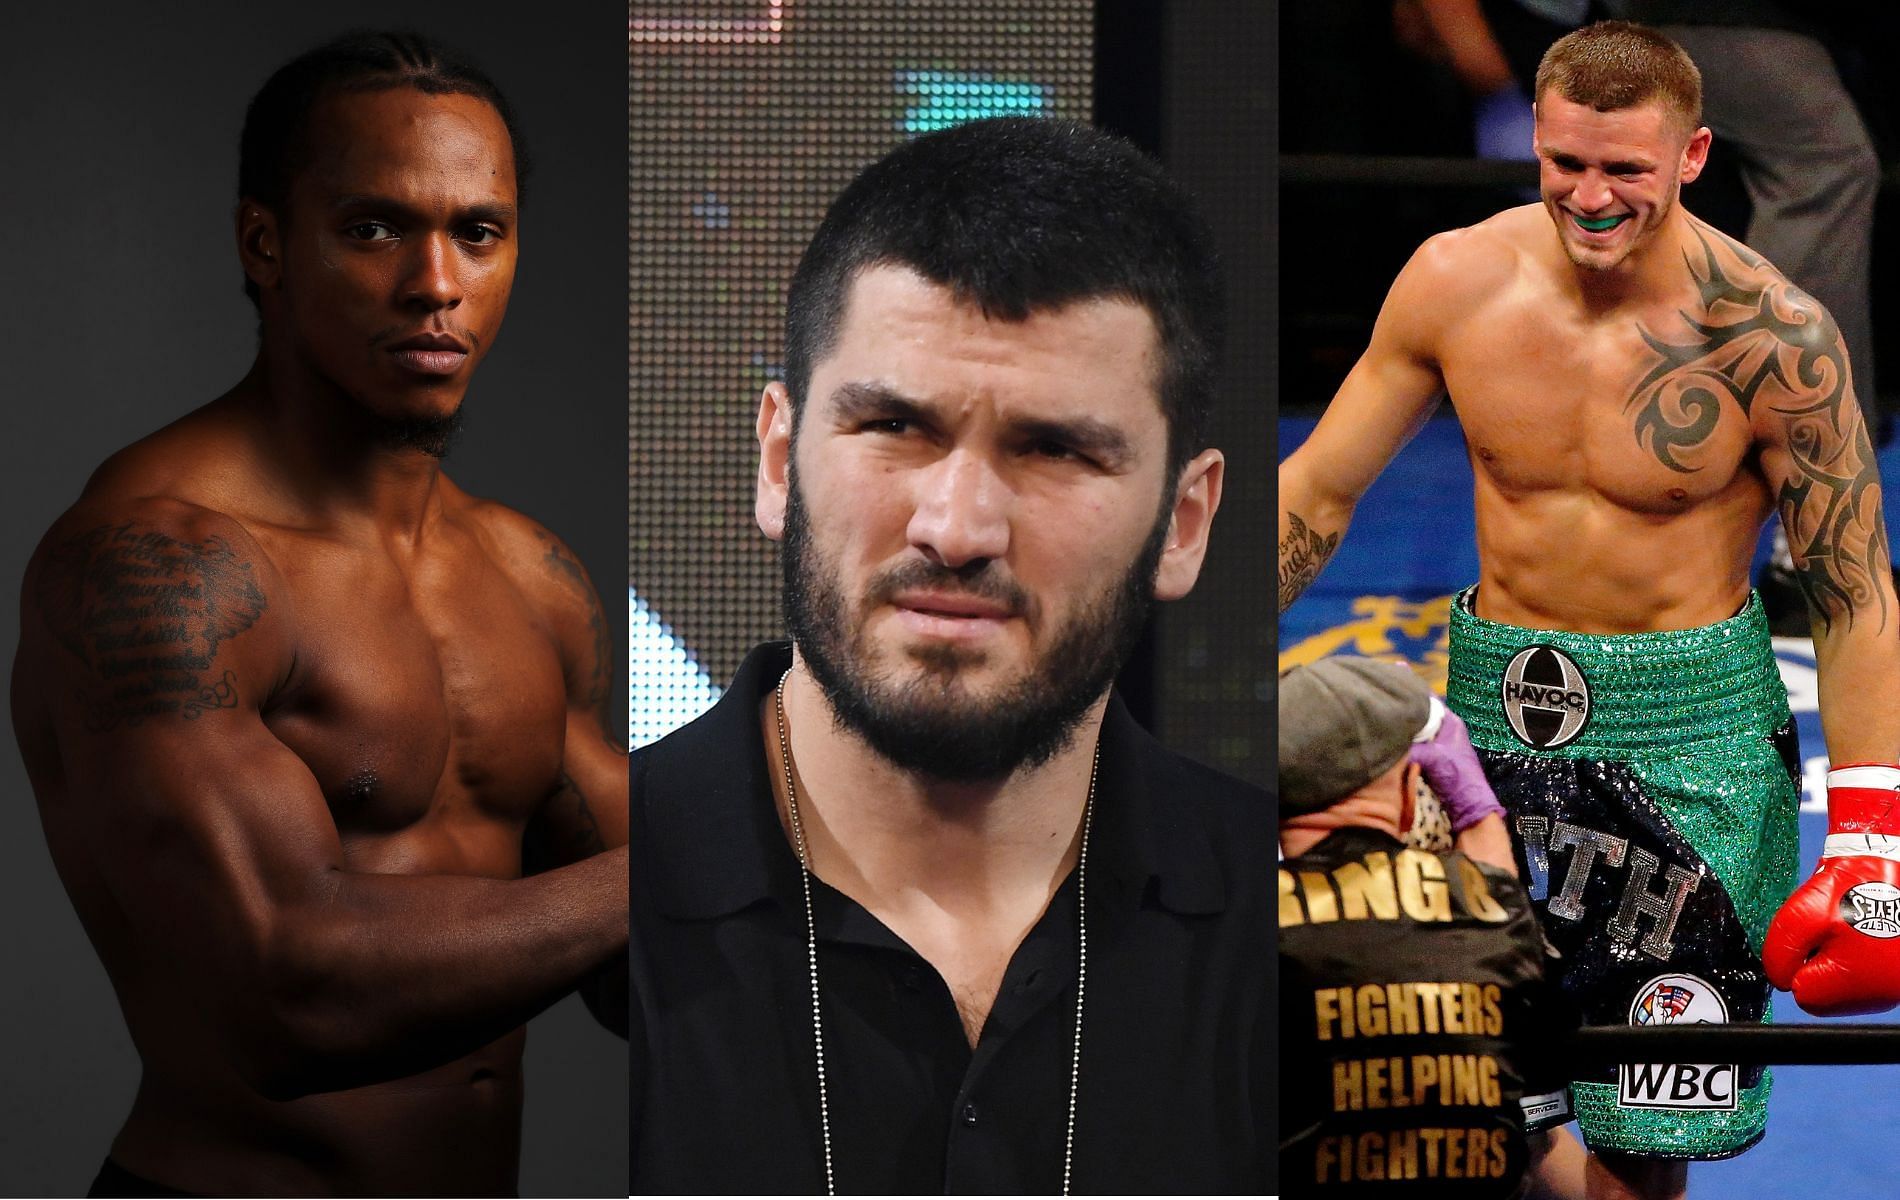 From Left to Right: Anthony Yarde, Artur Beterbiev, Joe Smith Jr.